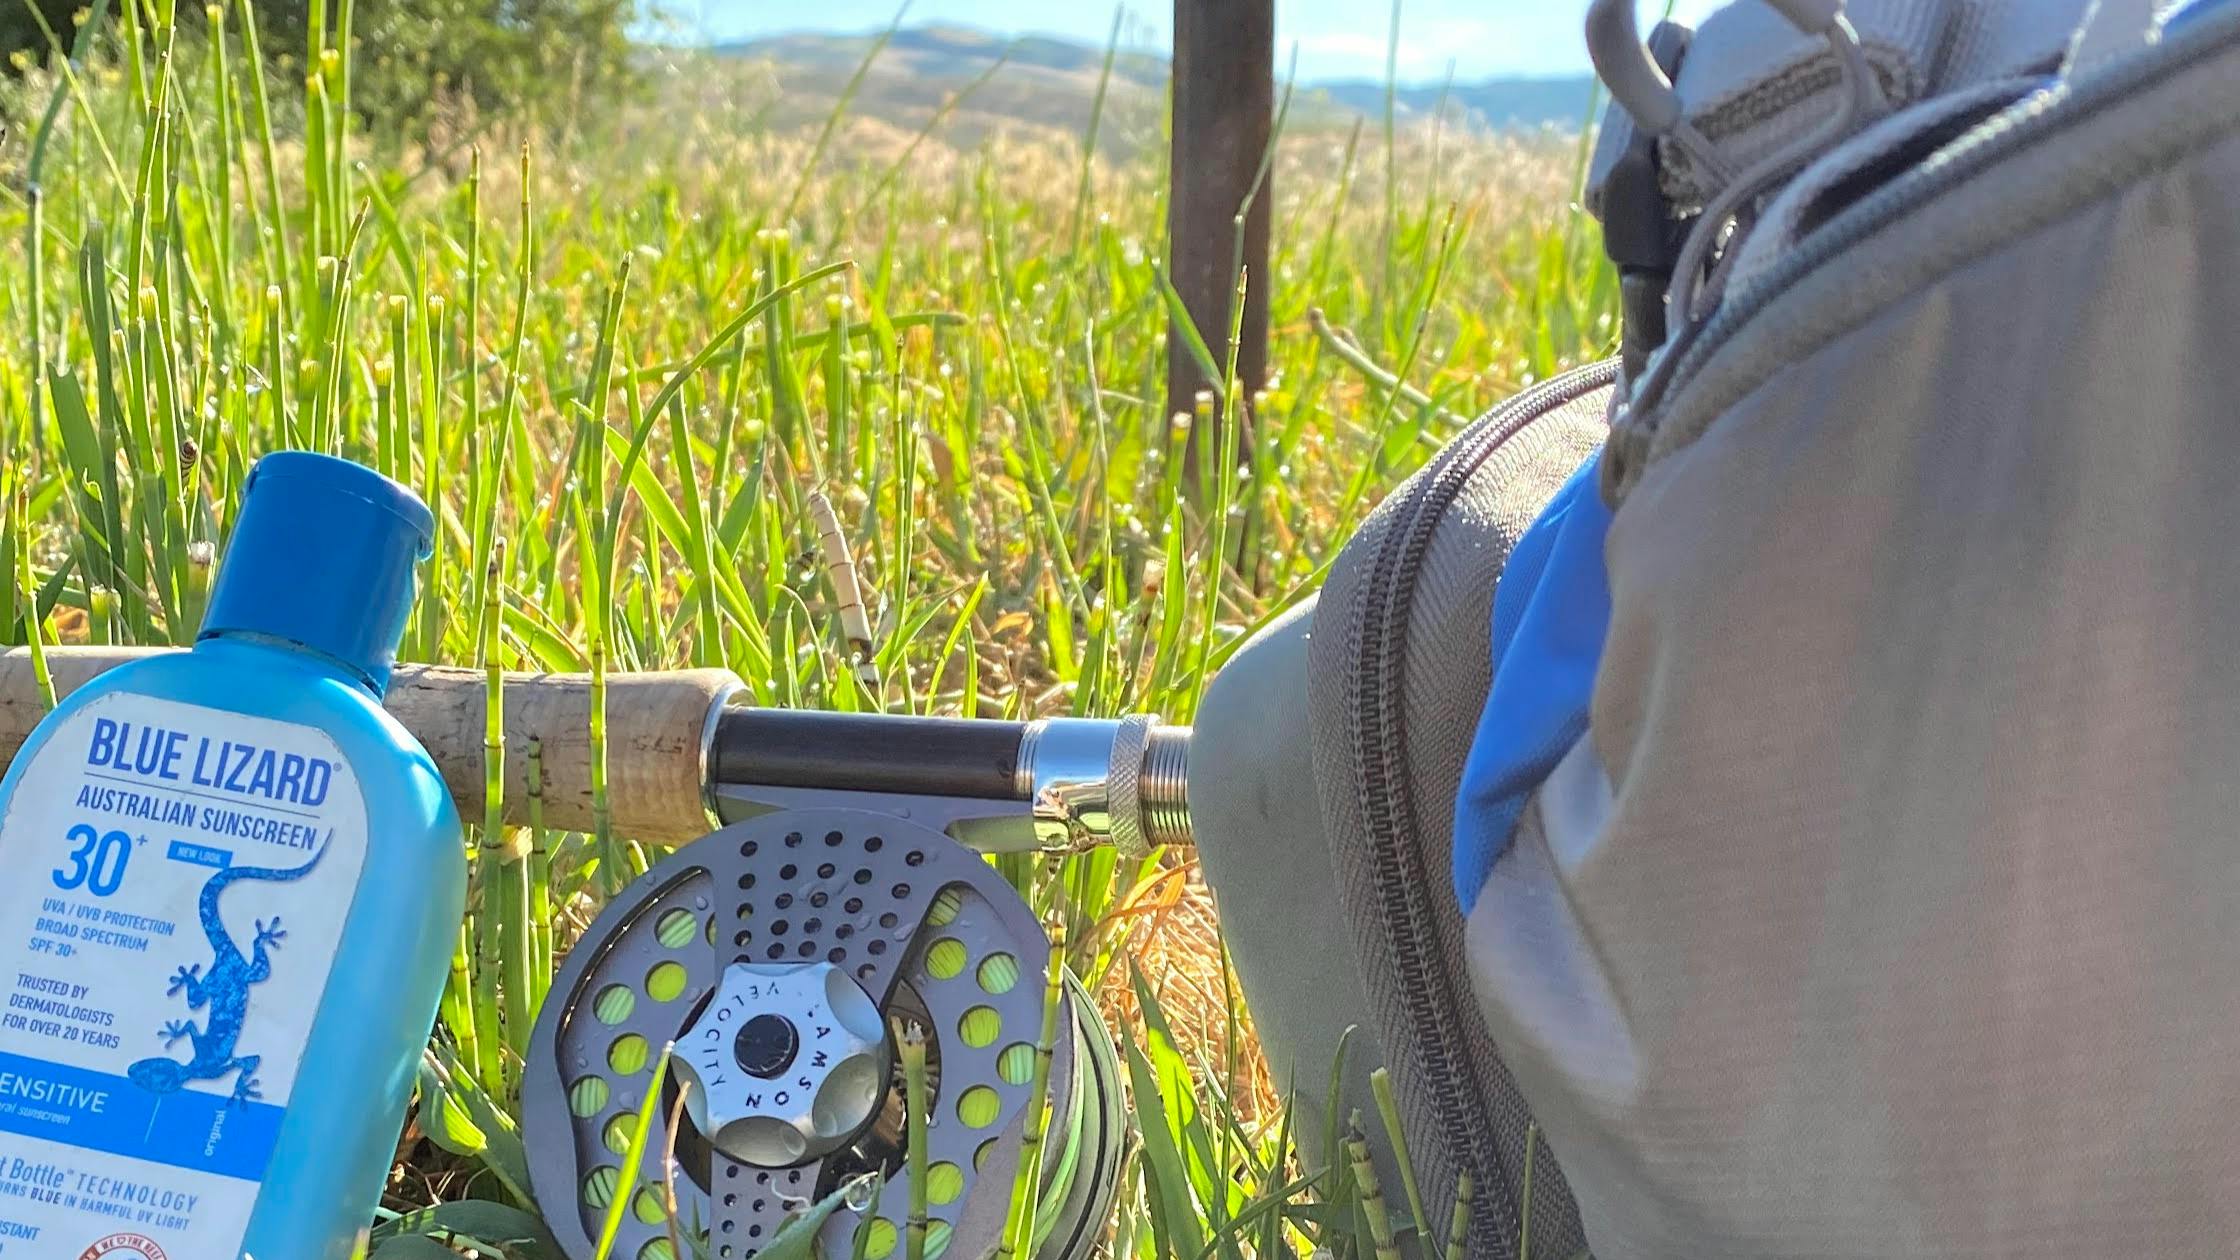 A fly fishing pack, sunscreen, and rod and reel laying in the grass